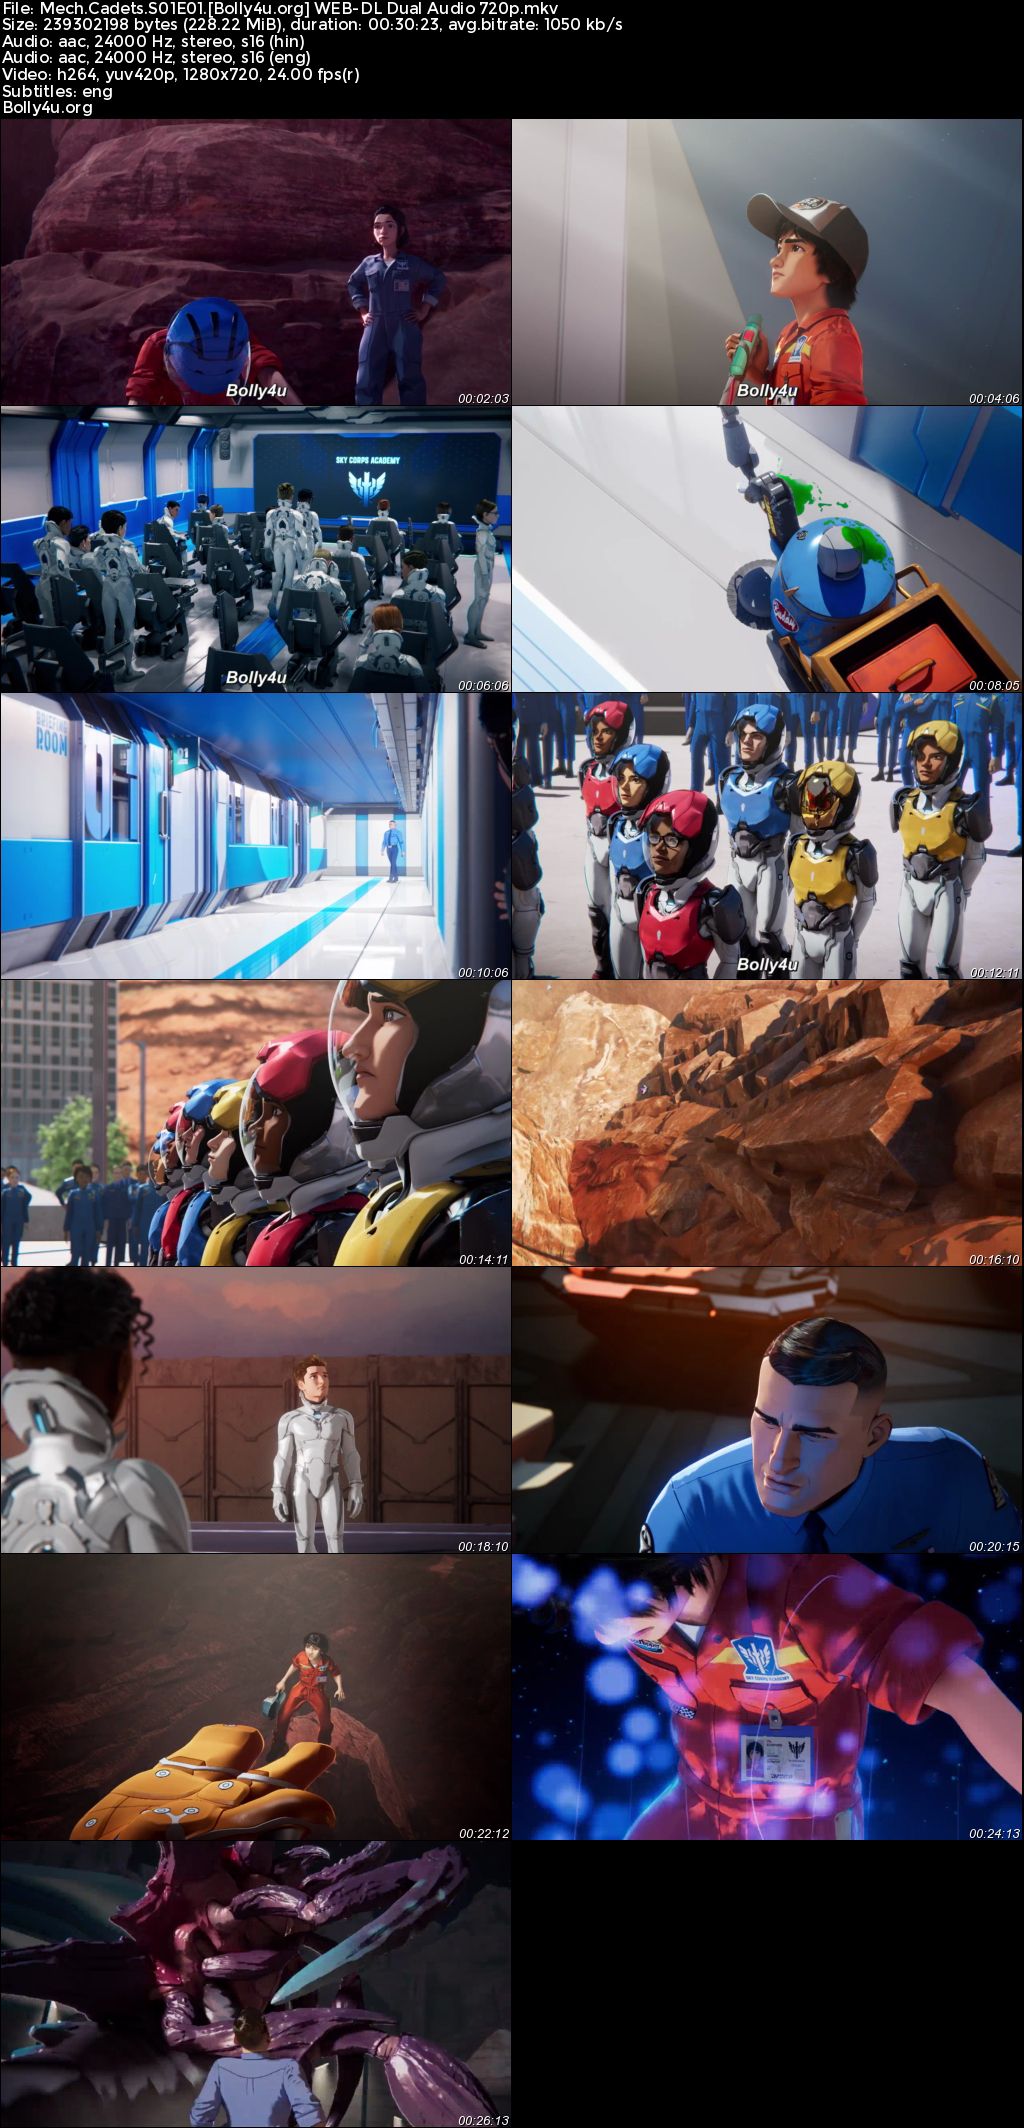 Mech Cadets 2023 WEB-DL Hindi Dual Audio ORG S01 Complete Download 720p 480p